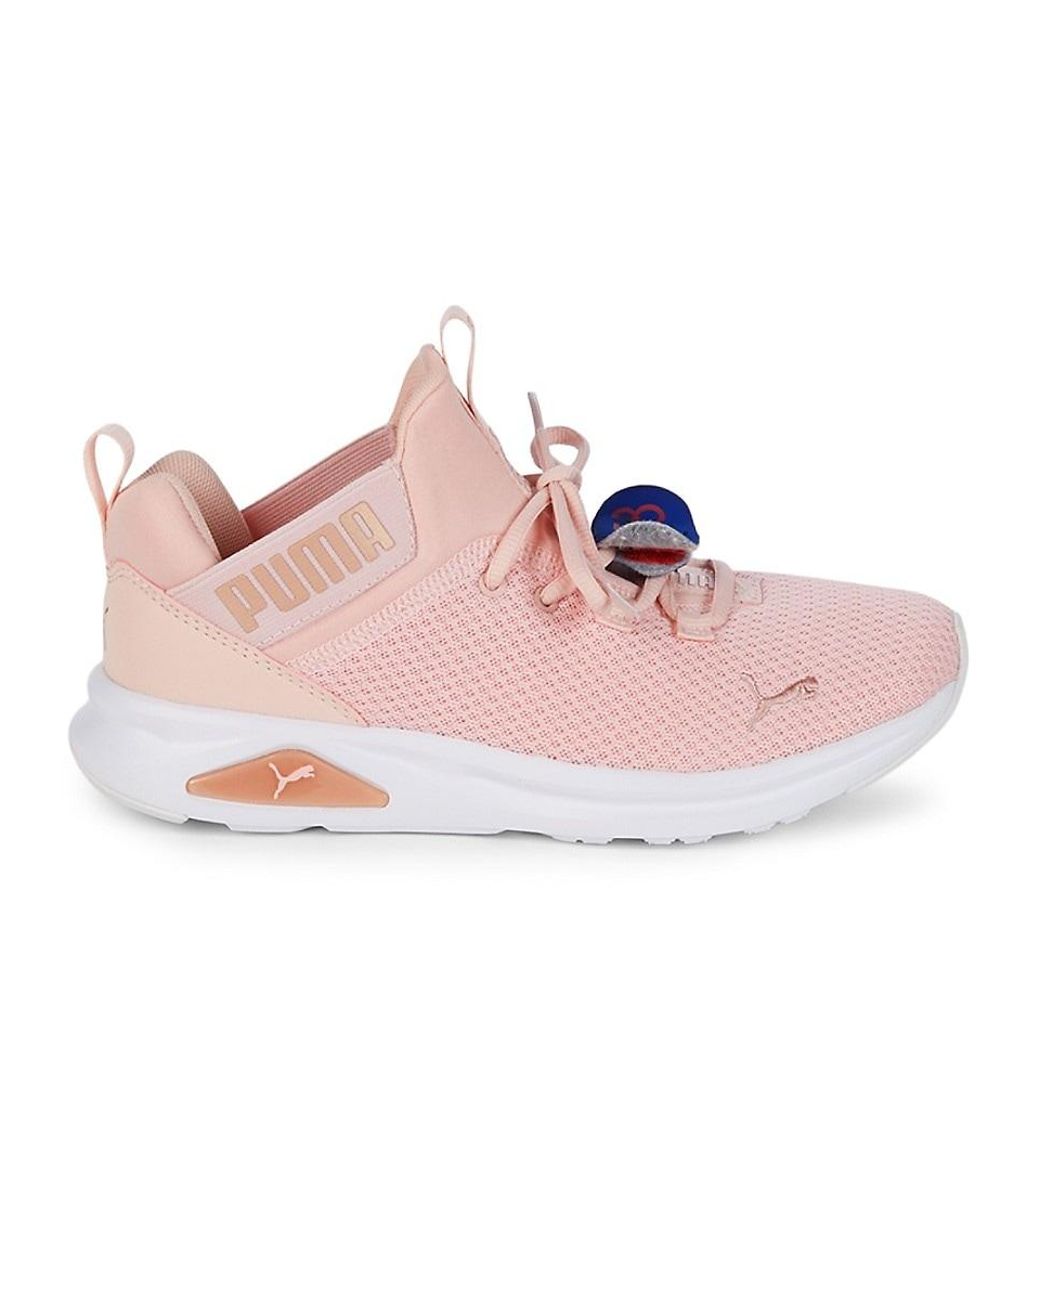 PUMA Enzo 2 Uncaged Sneakers in Pink | Lyst